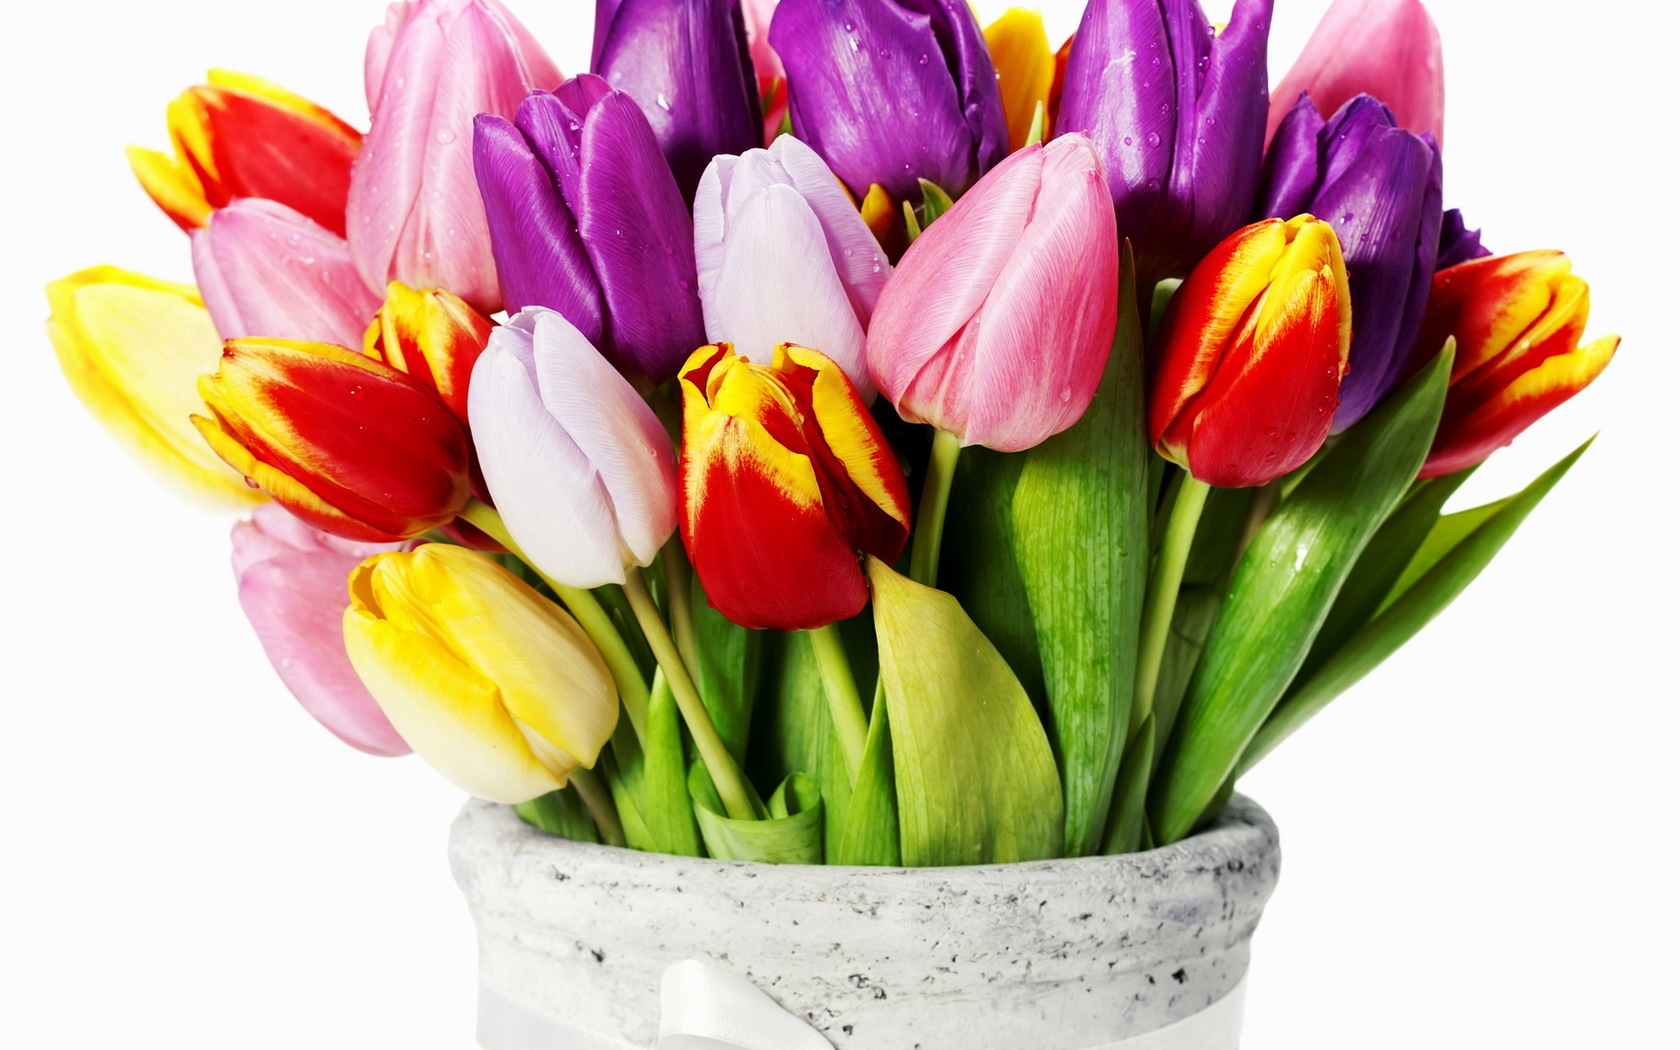 bouquets, plants, flowers, tulips cell phone wallpapers